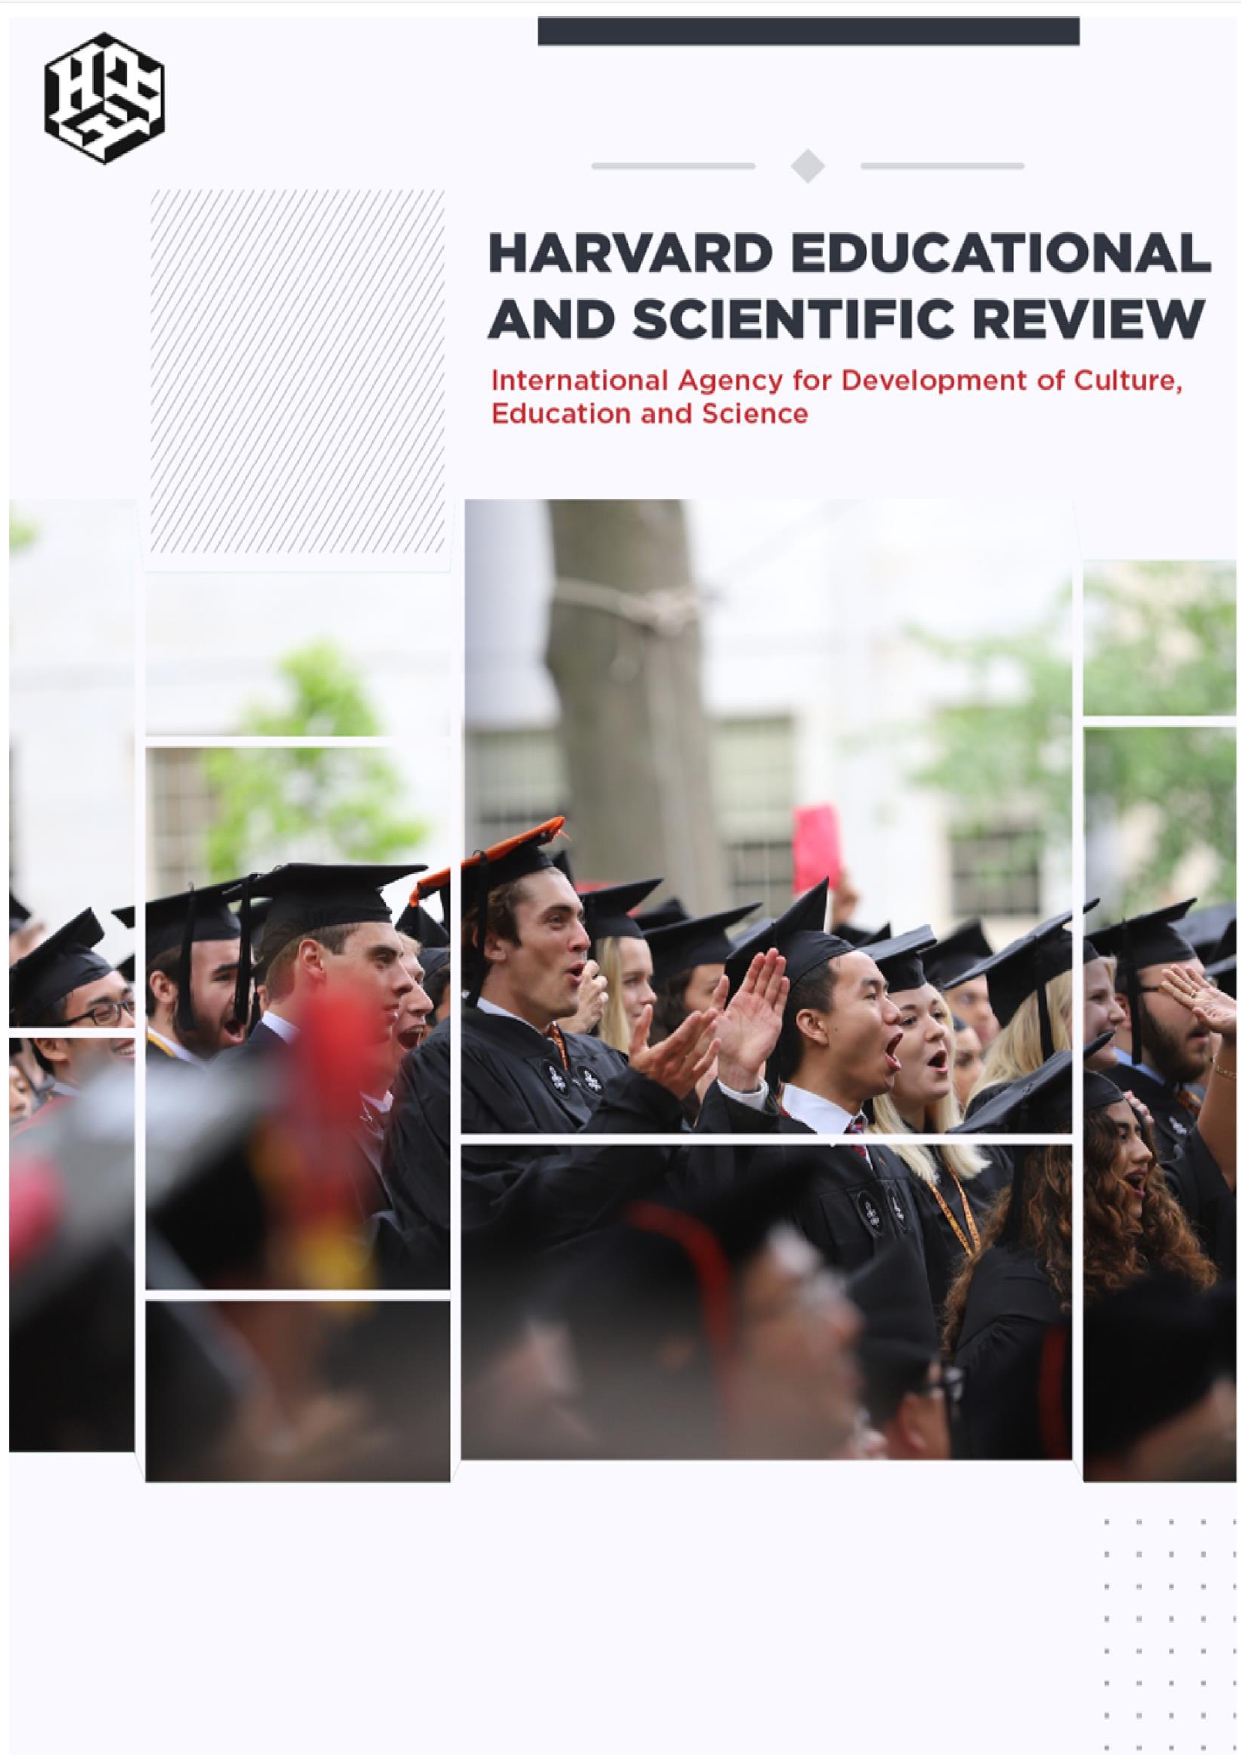 					View Vol. 2 No. 1 (2022): Harvard Educational and Scientific Review
				